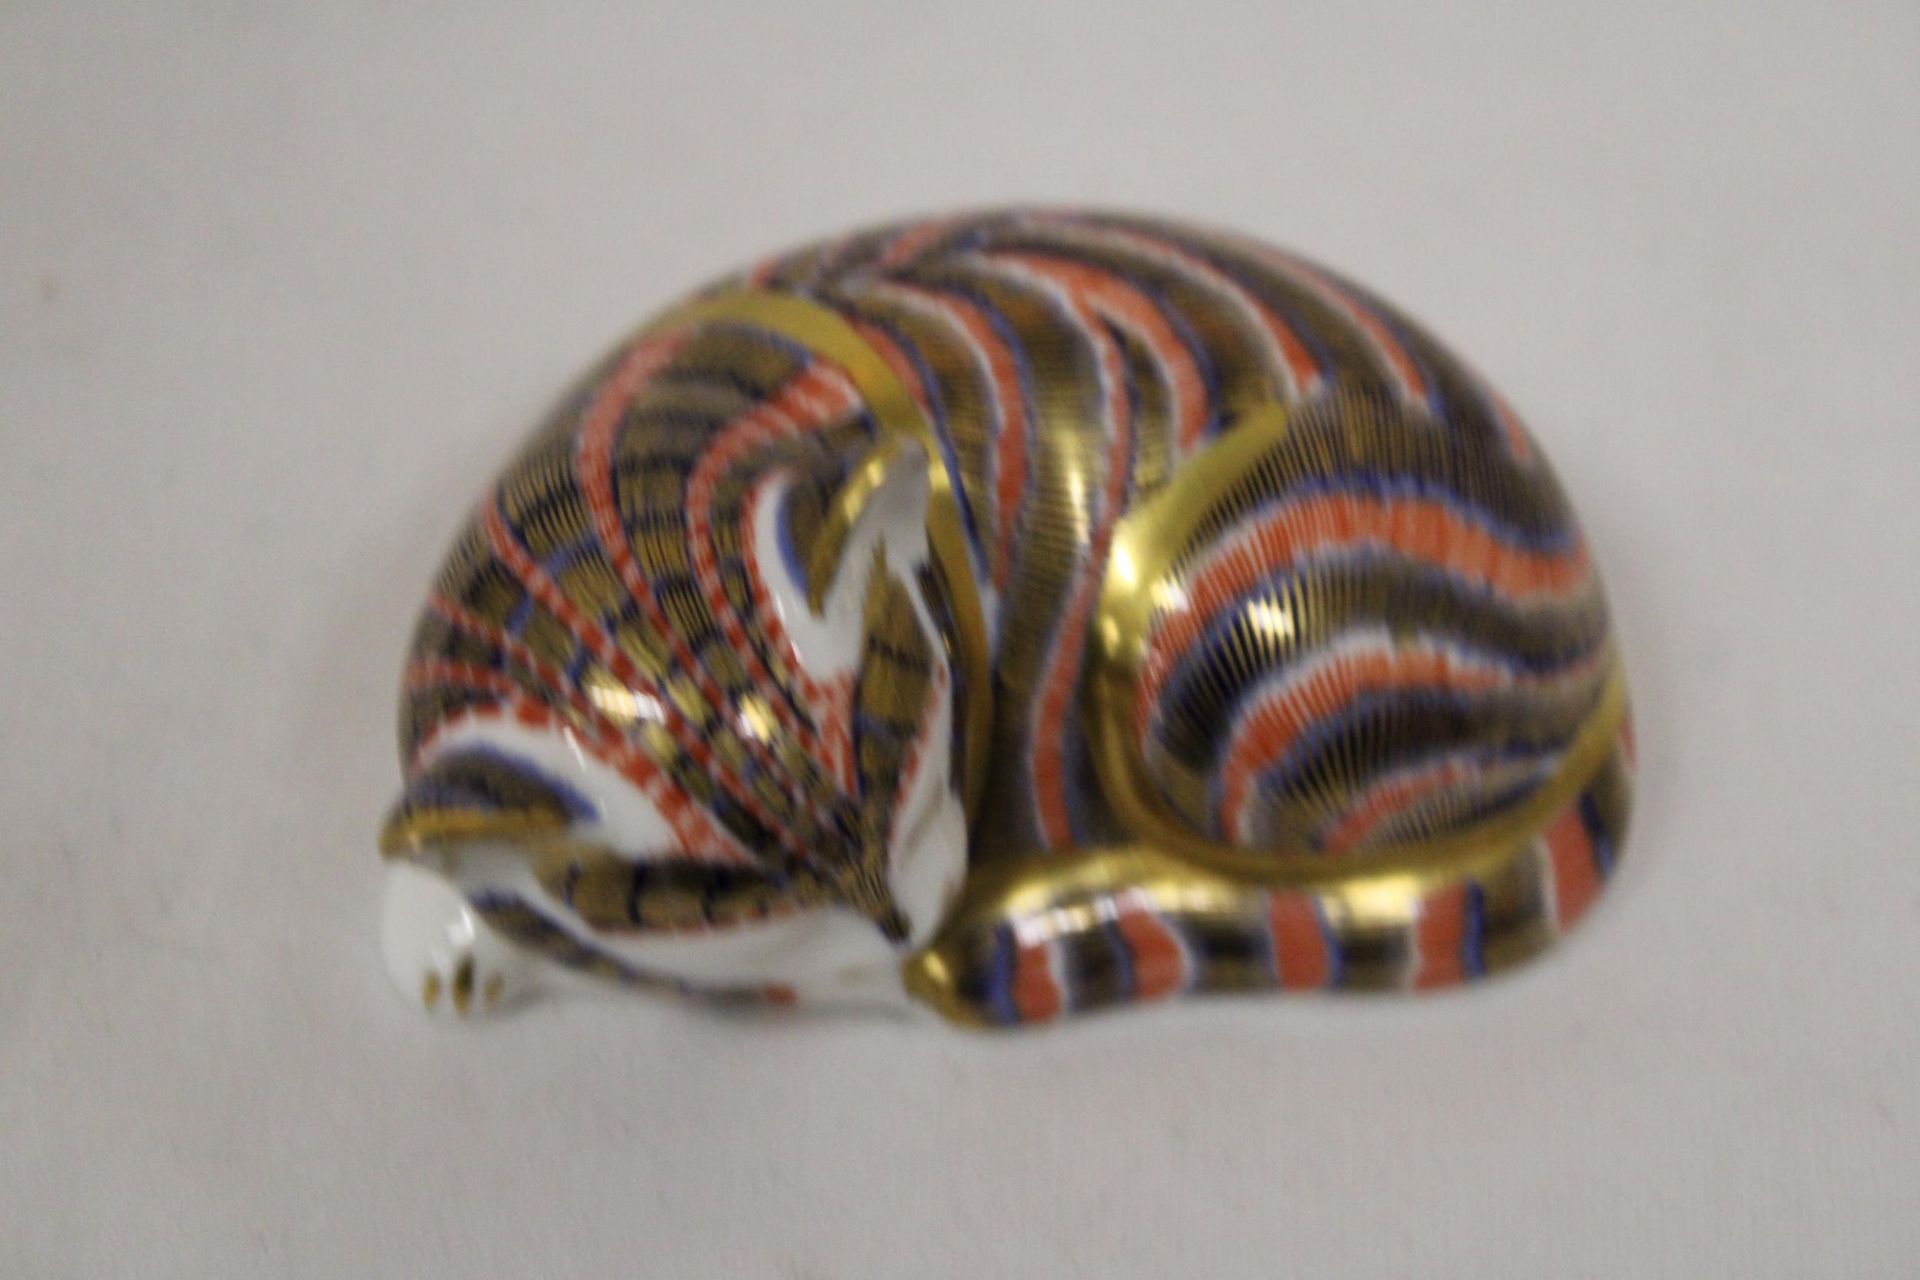 A ROYAL CROWN DERBY SLEEPING CAT (FIRSTS)